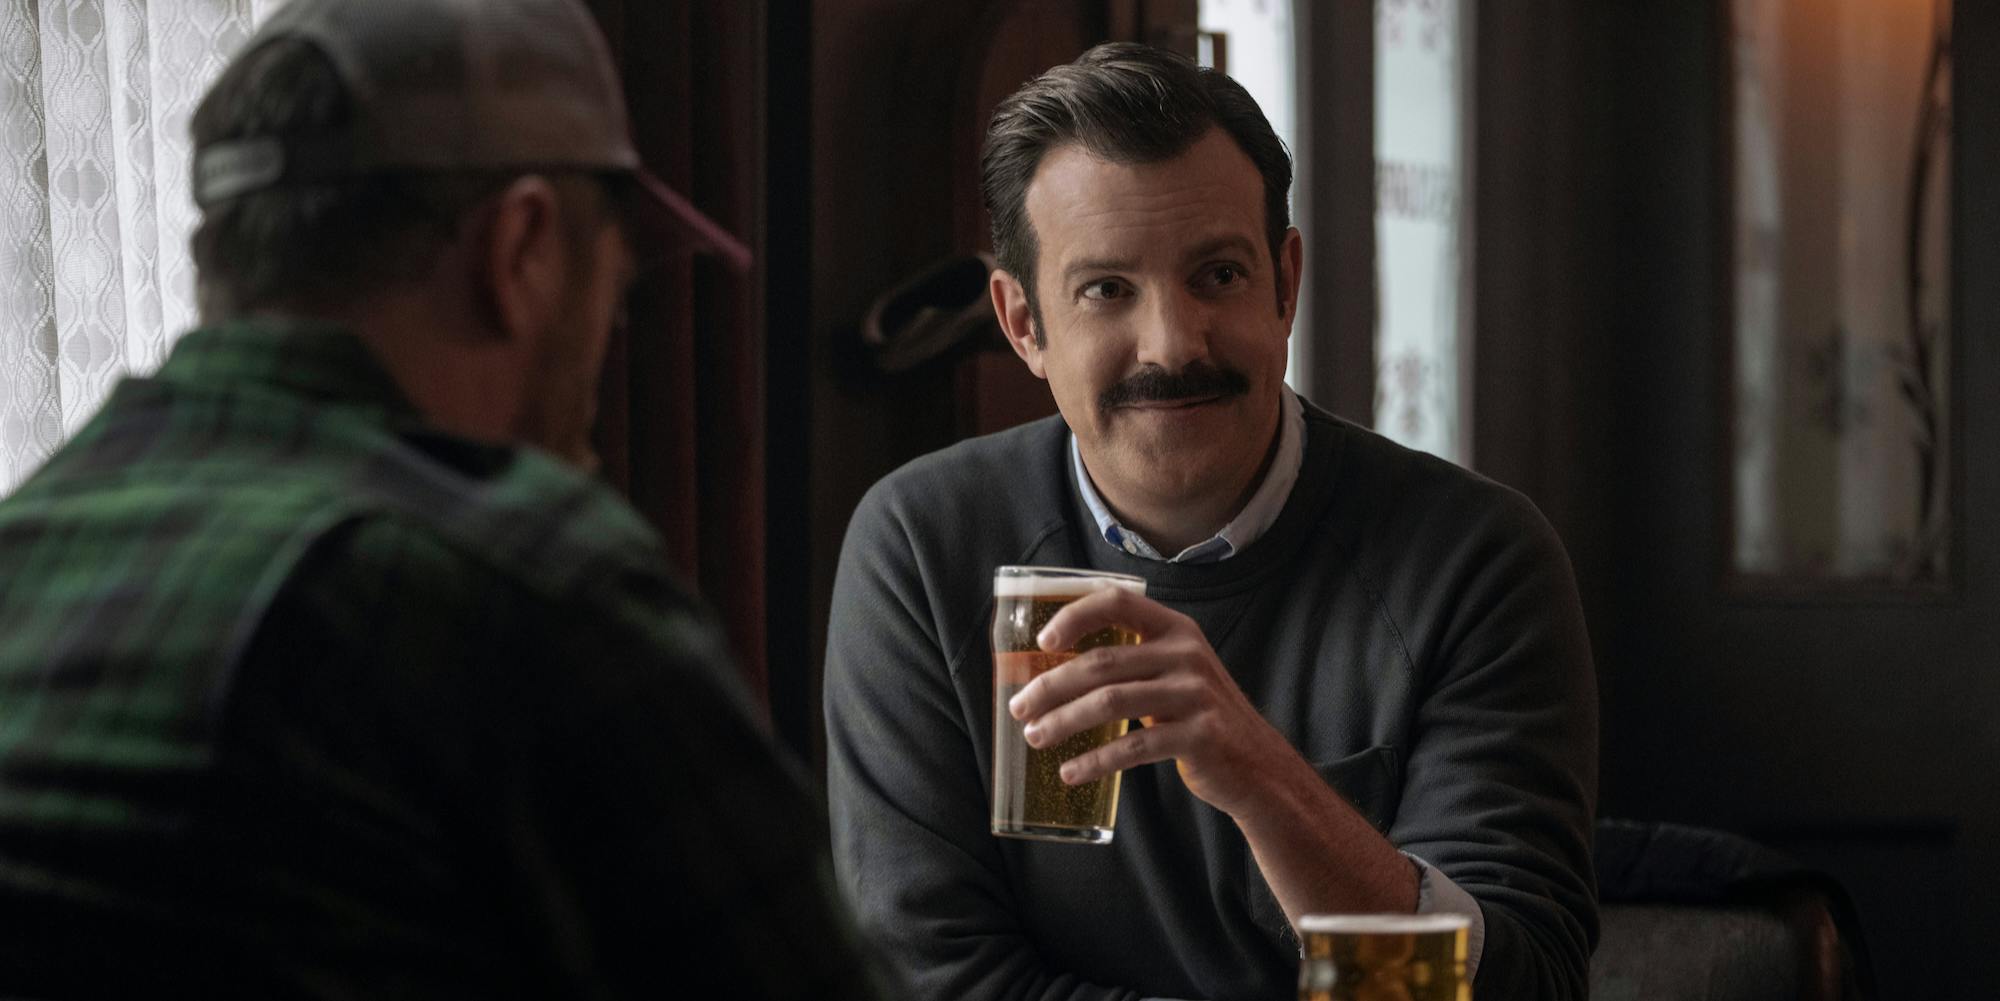 Ted Lasso season 3's gay footballer storyline has arrived at just the right  time